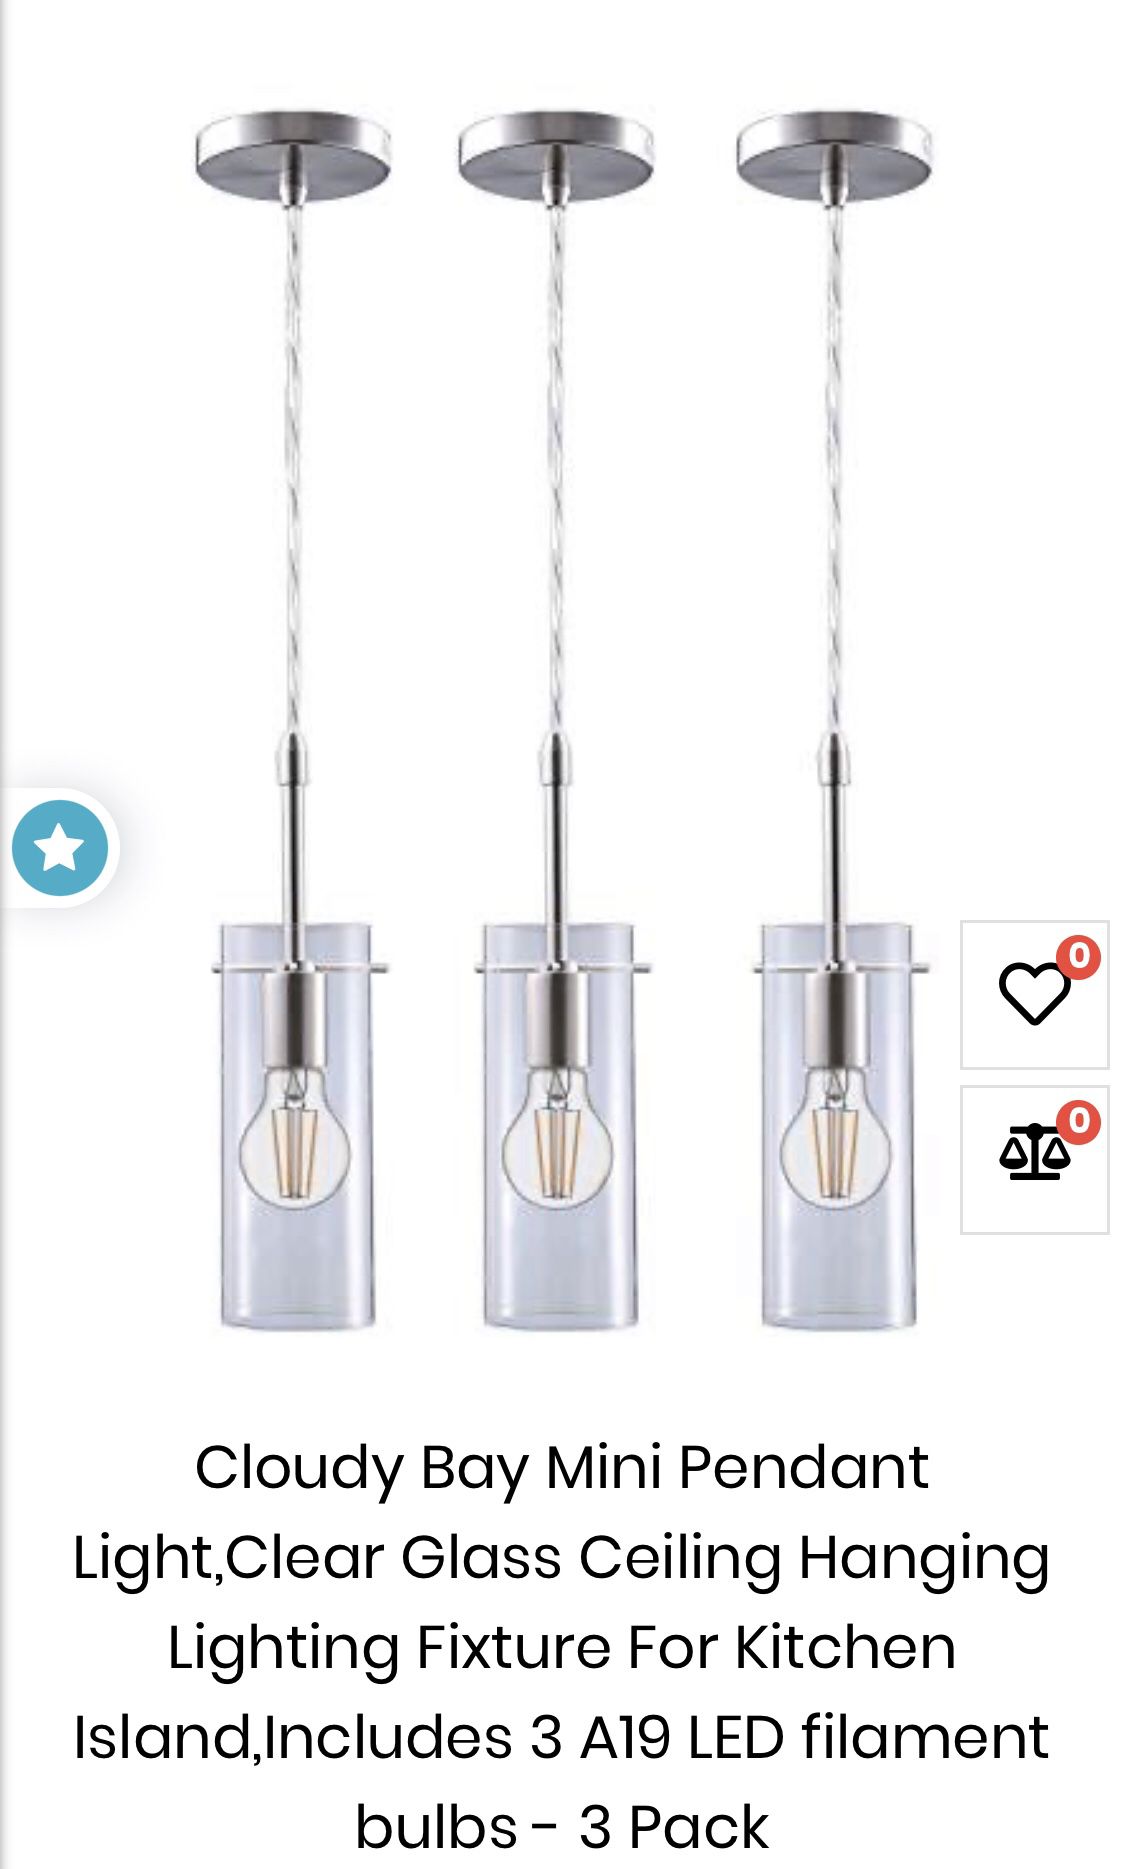 Cloudy Bay Mini Pendant Light,Clear Glass Ceiling Hanging Lighting Fixture For Kitchen Island,Includes 3 A19 LED filament bulbs - 3 Pack.